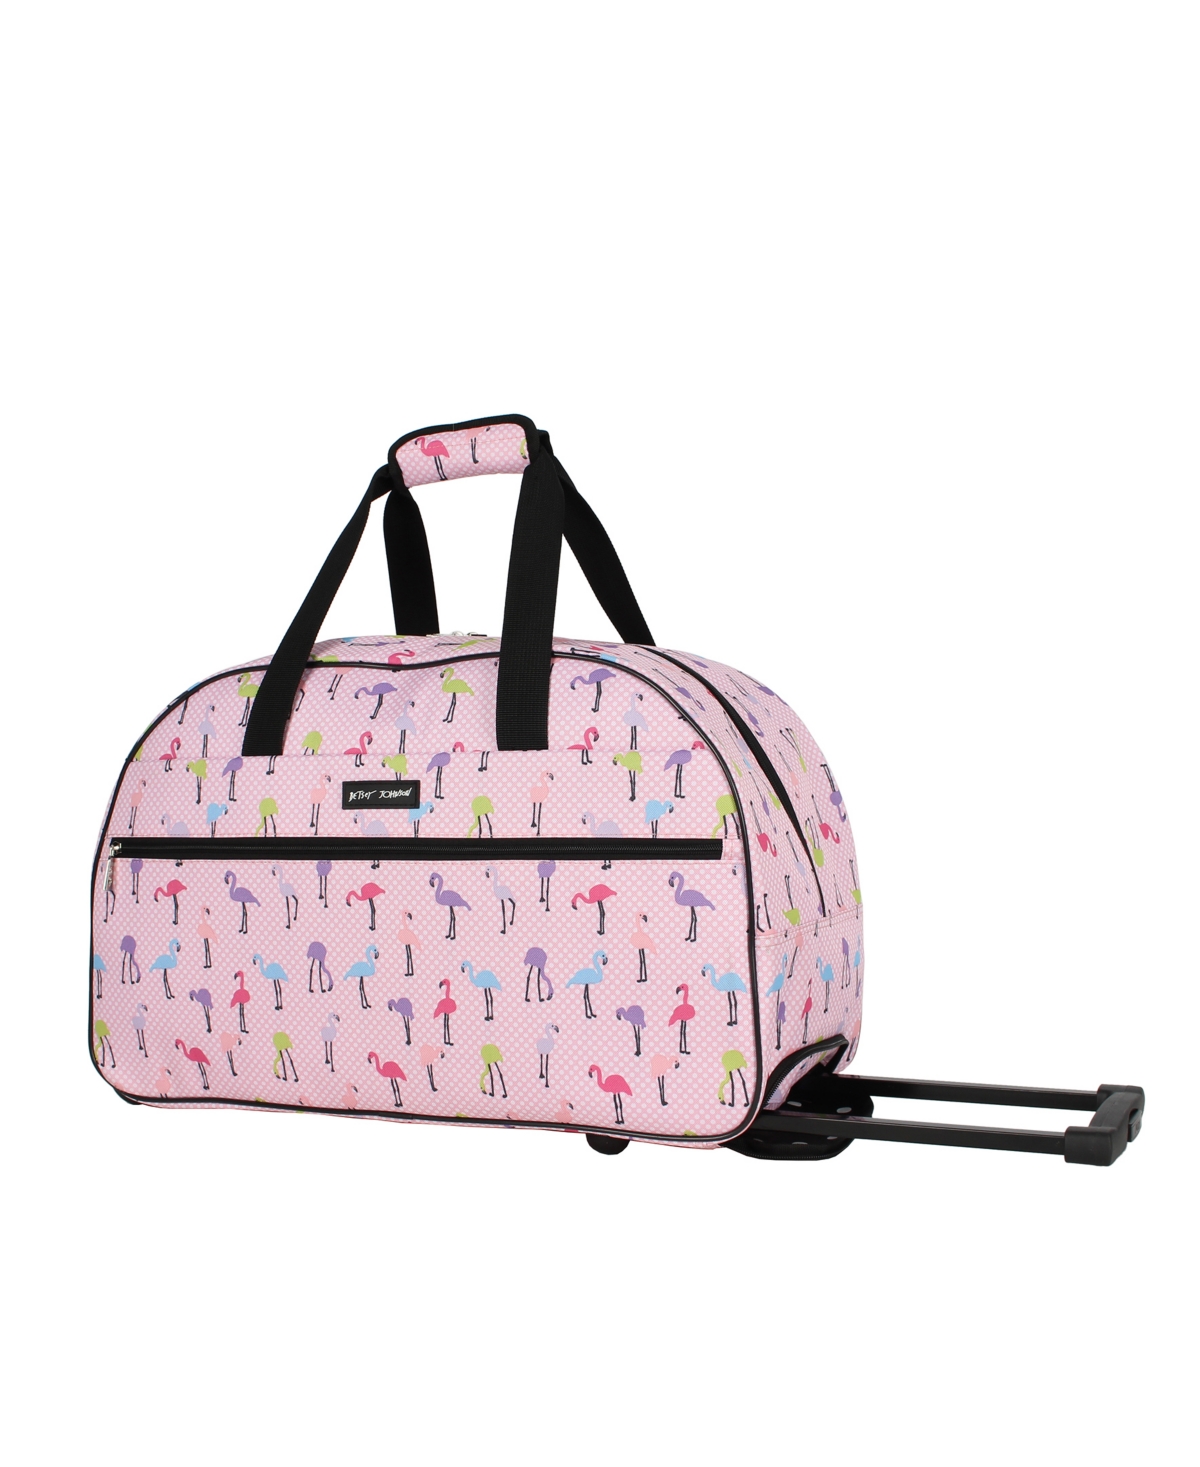 Betsey Johnson Carry-on Softside Rolling Duffel Bag In Flamingo Parade